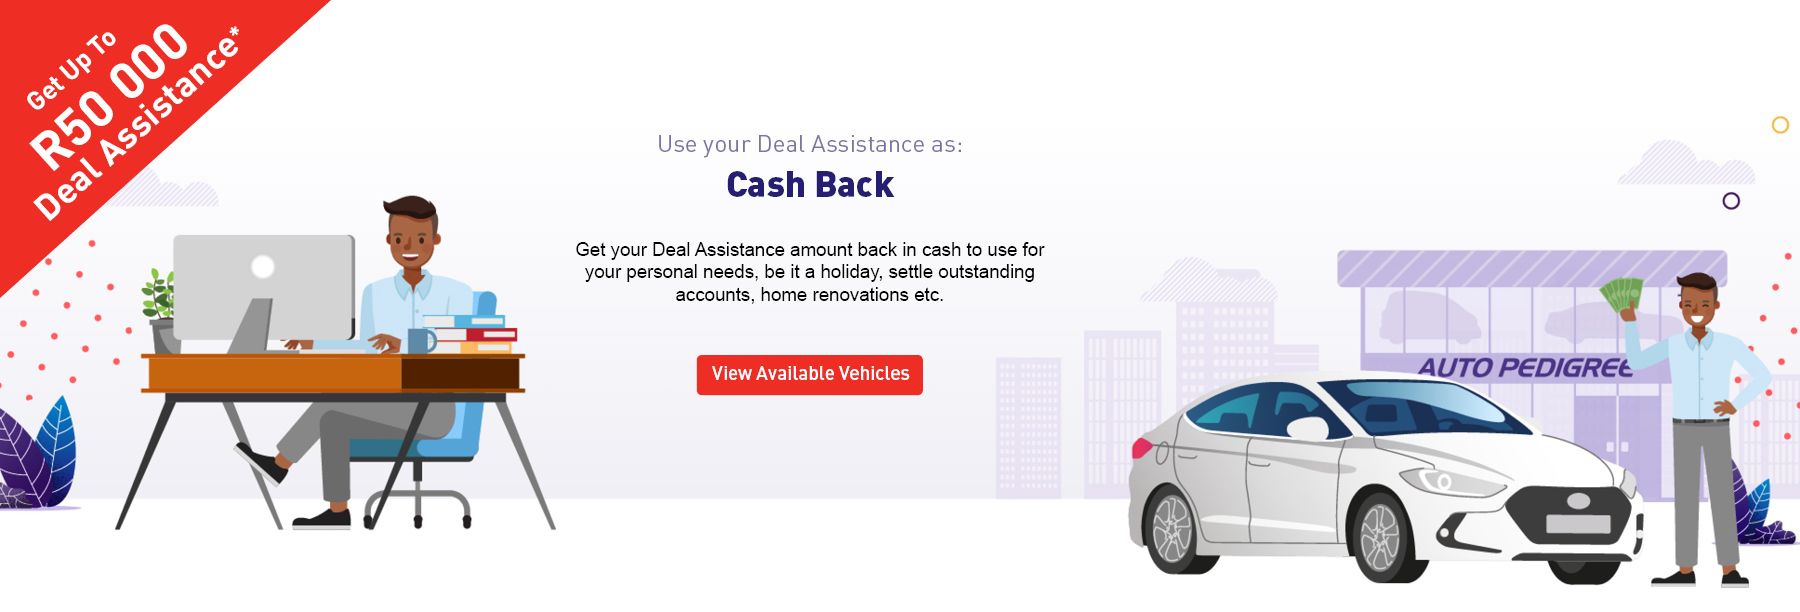 Auto Pedigree deal assistance used as cash back example